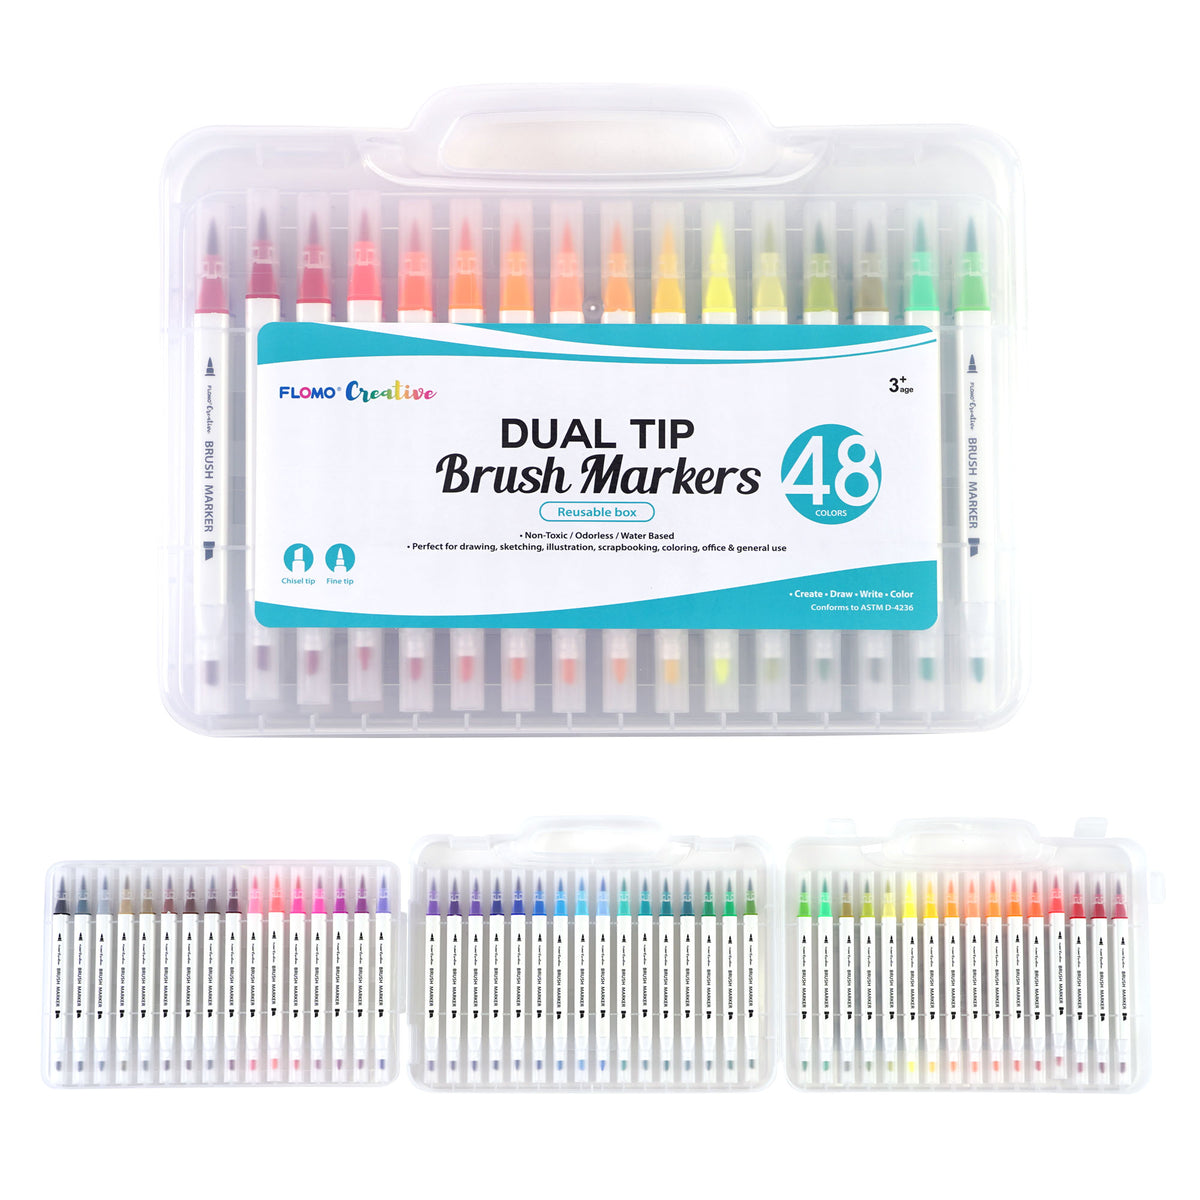 OOLY Brushed double sided felt-tip pens Dual tone